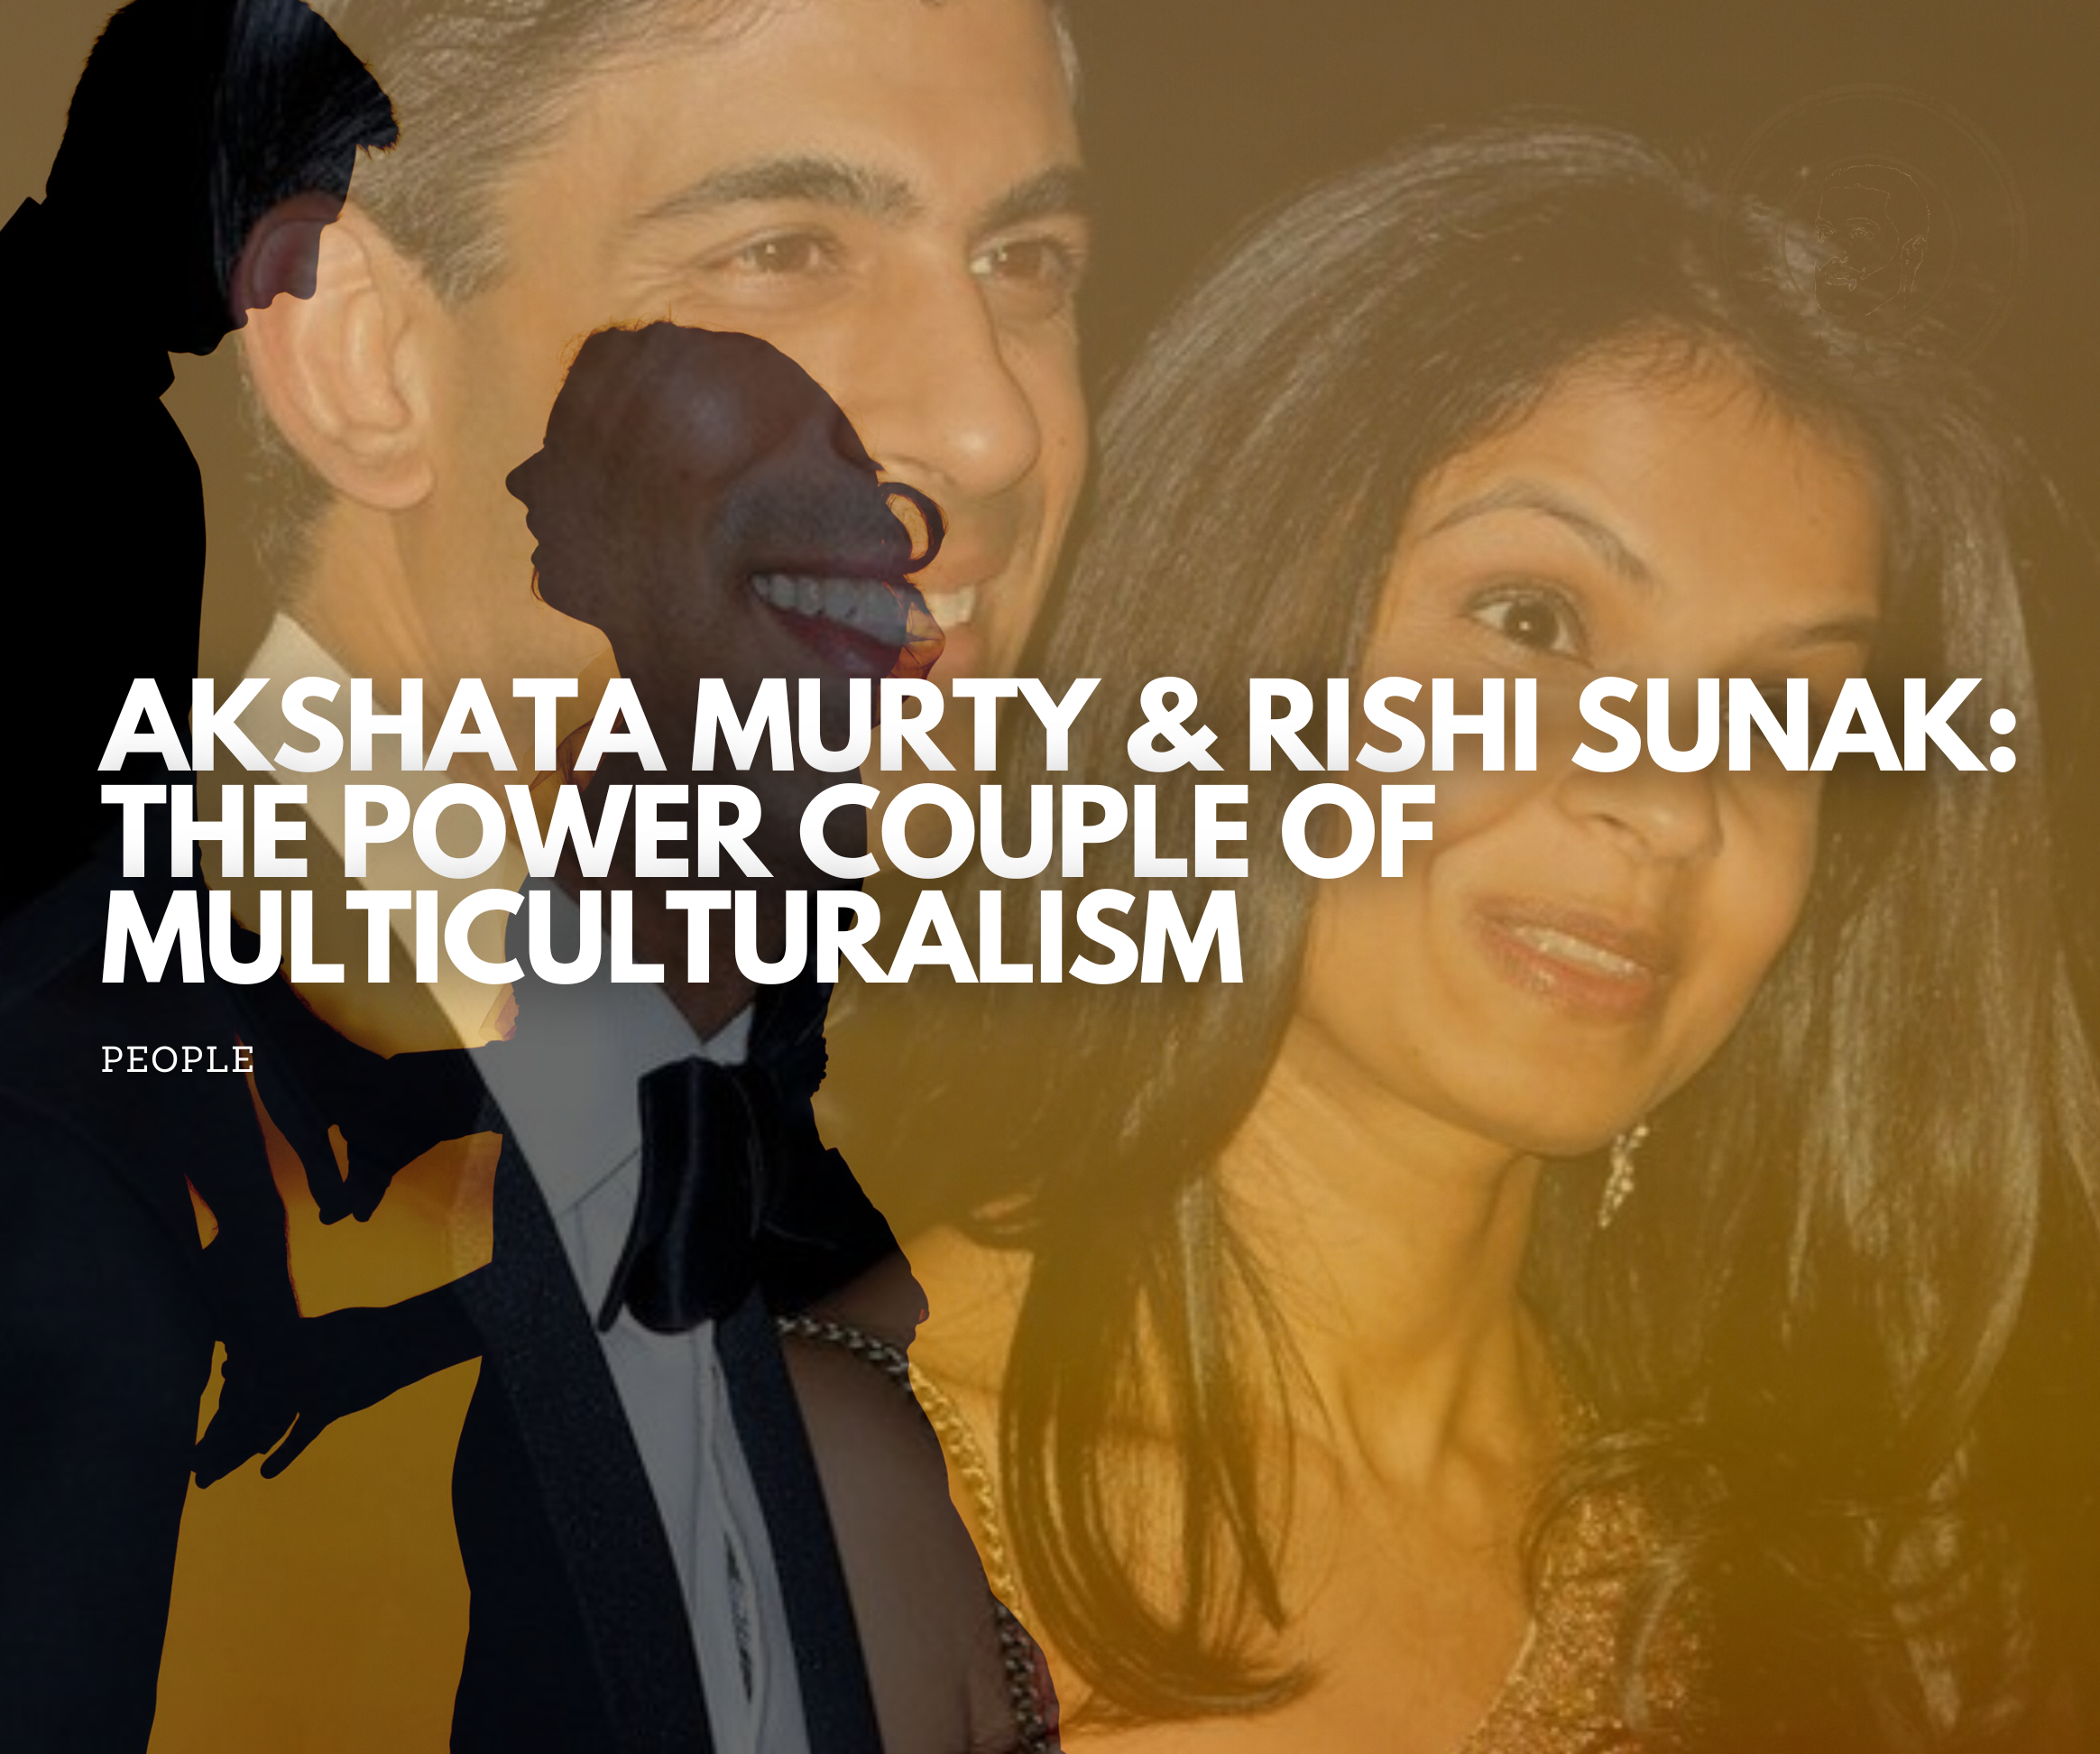 Akshata Murty & Rishi Sunak: The Power Couple of Multiculturalism, A partnership journey unfolding healthy relationship in diversity.